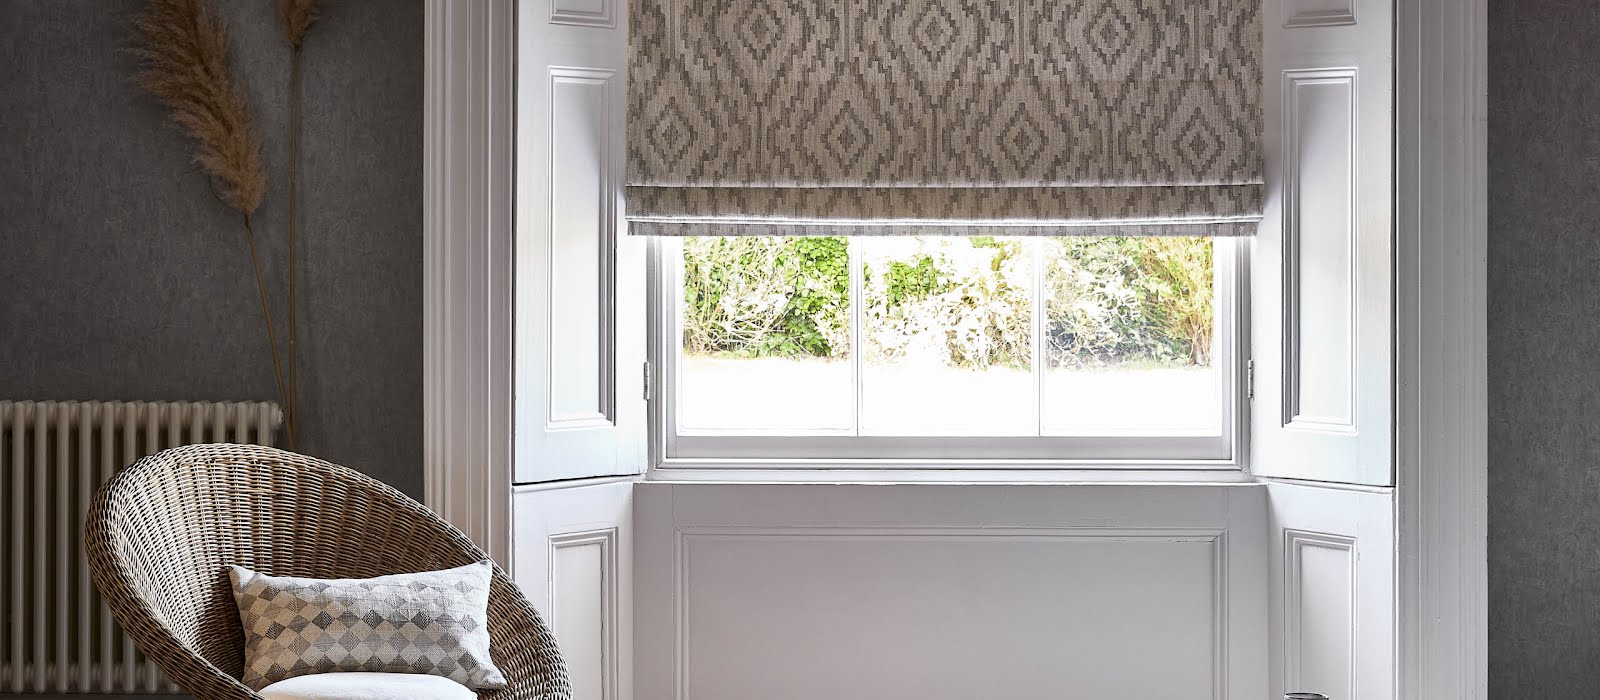 Our guide to curtains, blinds and shutters, to help you shut out the winter in style